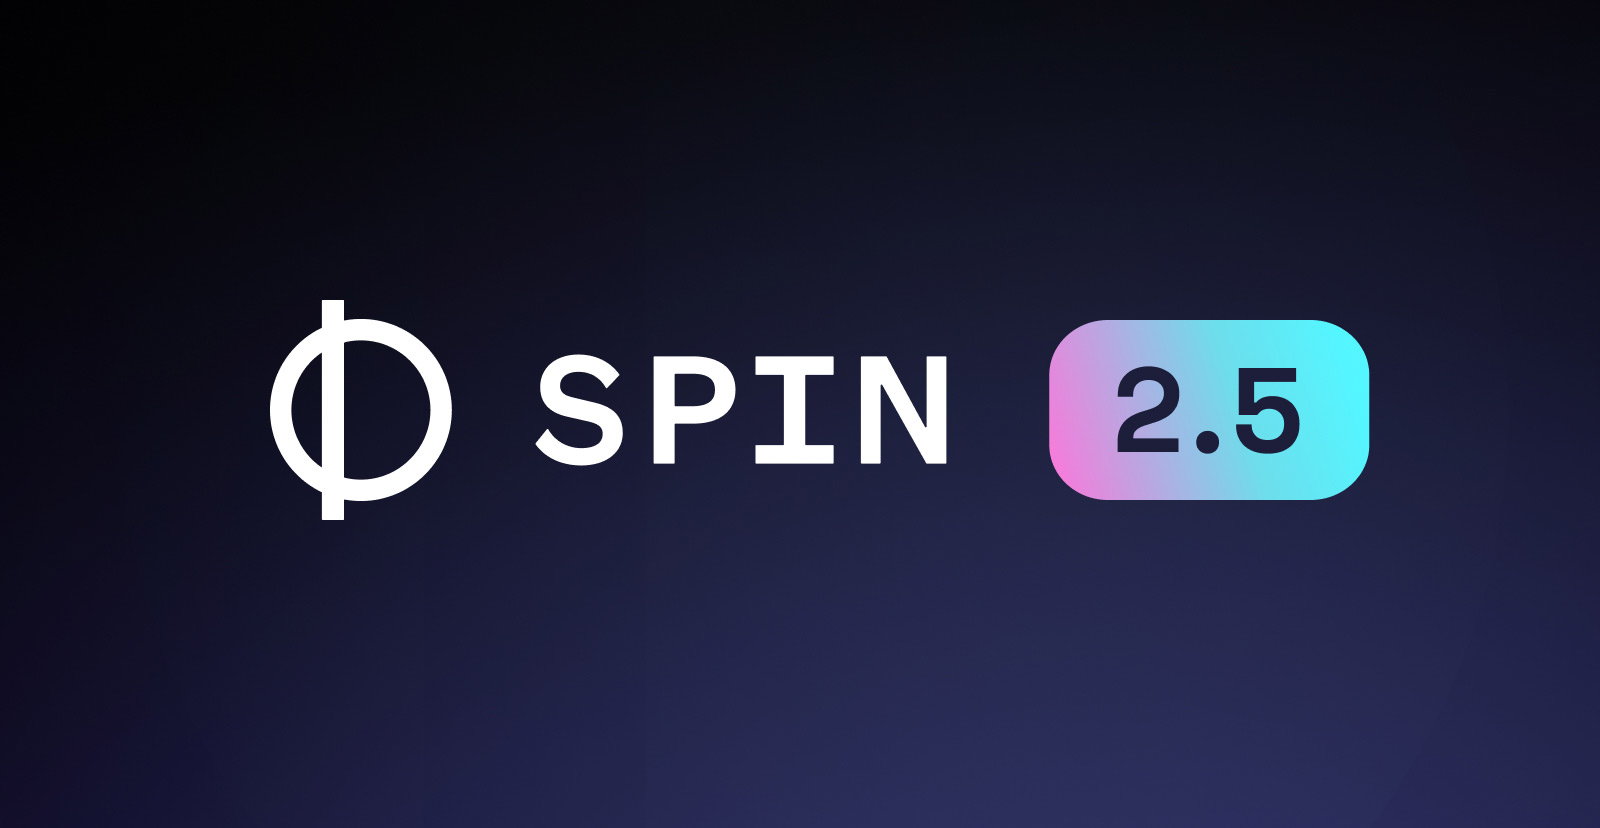 Announcing Spin 2.5